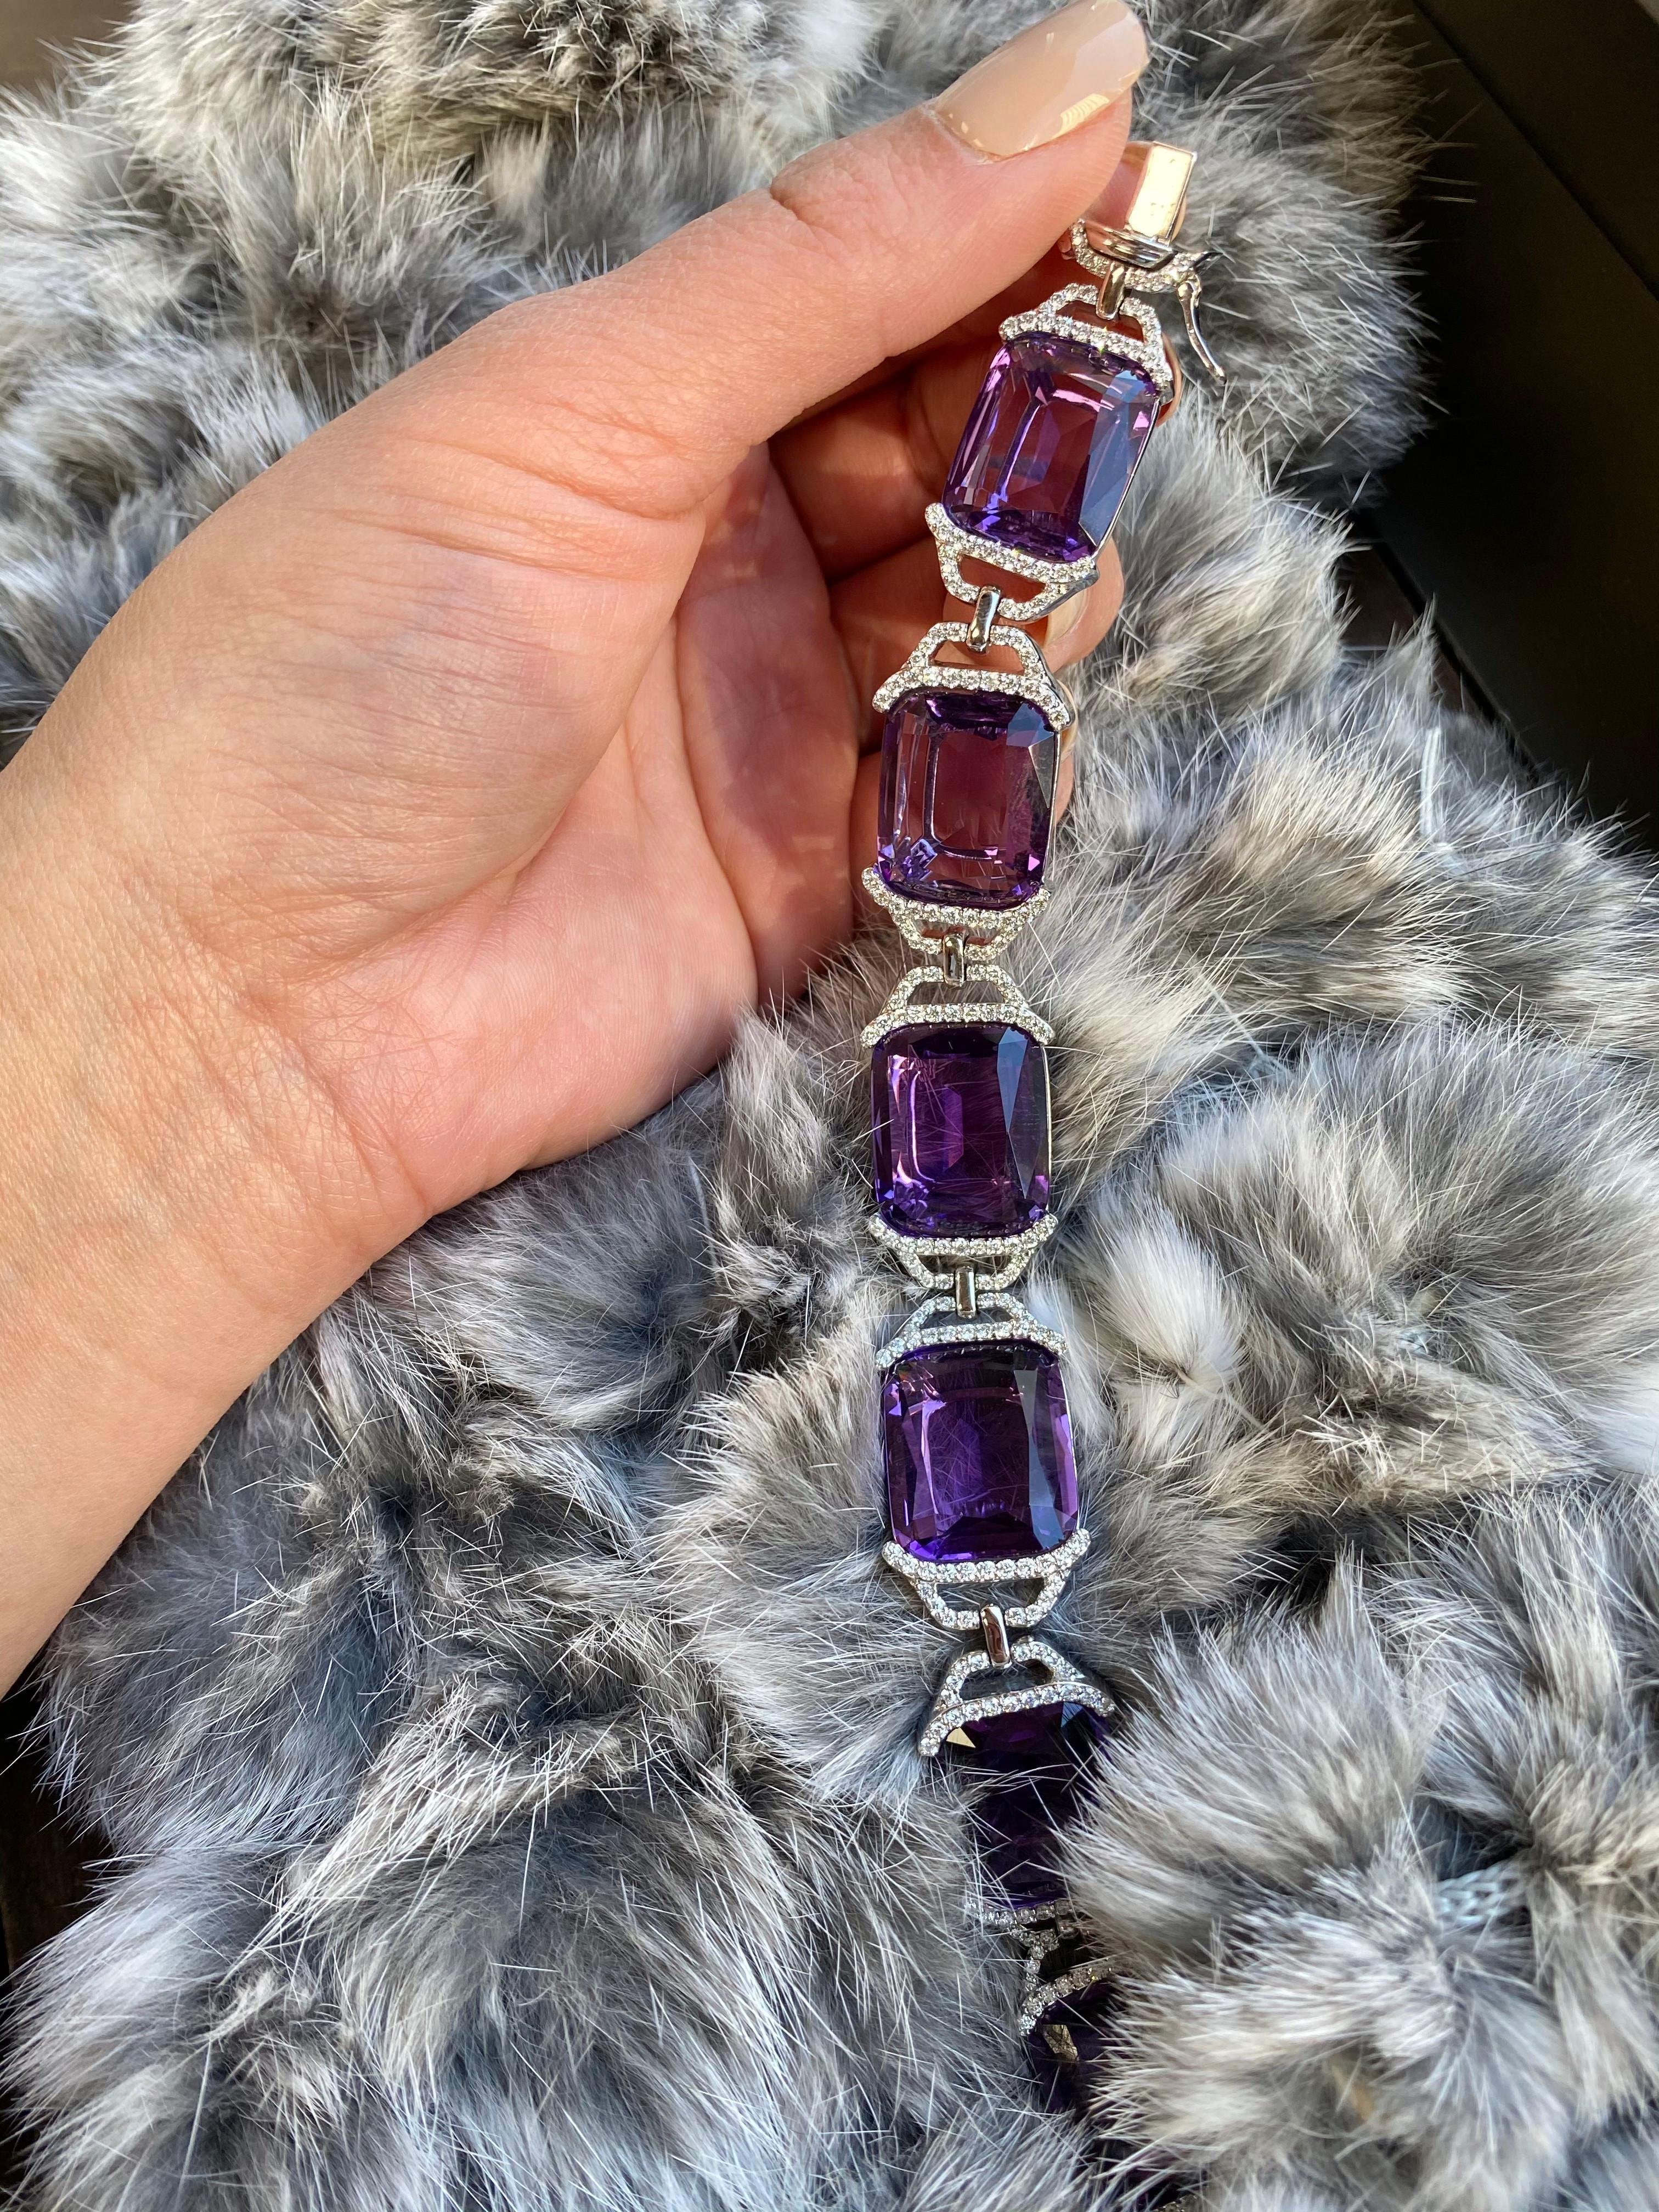 The Amethyst Cushion Bracelet with Diamonds in 18K White Gold is a stunning piece of jewelry from the 'Gossip' Collection. It features beautiful cushion-shaped amethysts set in 18K white gold, surrounded by sparkling diamonds. The bracelet is